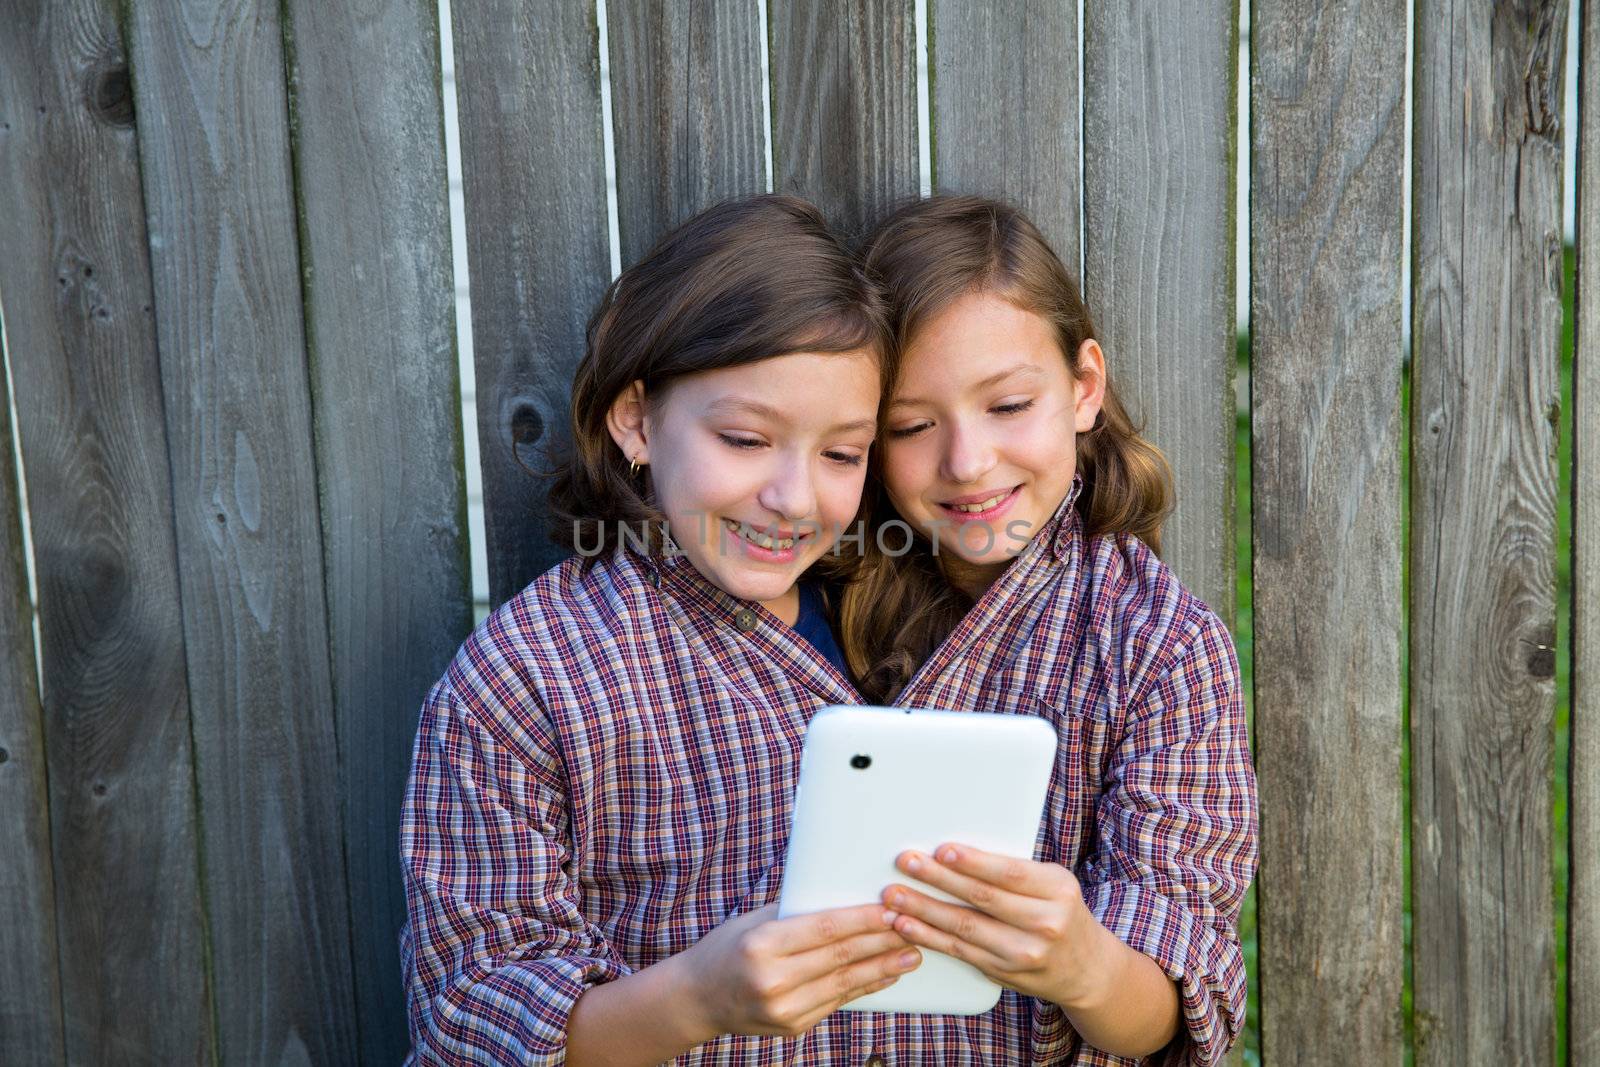 twin girls fancy dressed up pretending be siamese with dad shirt playing with tablet pc